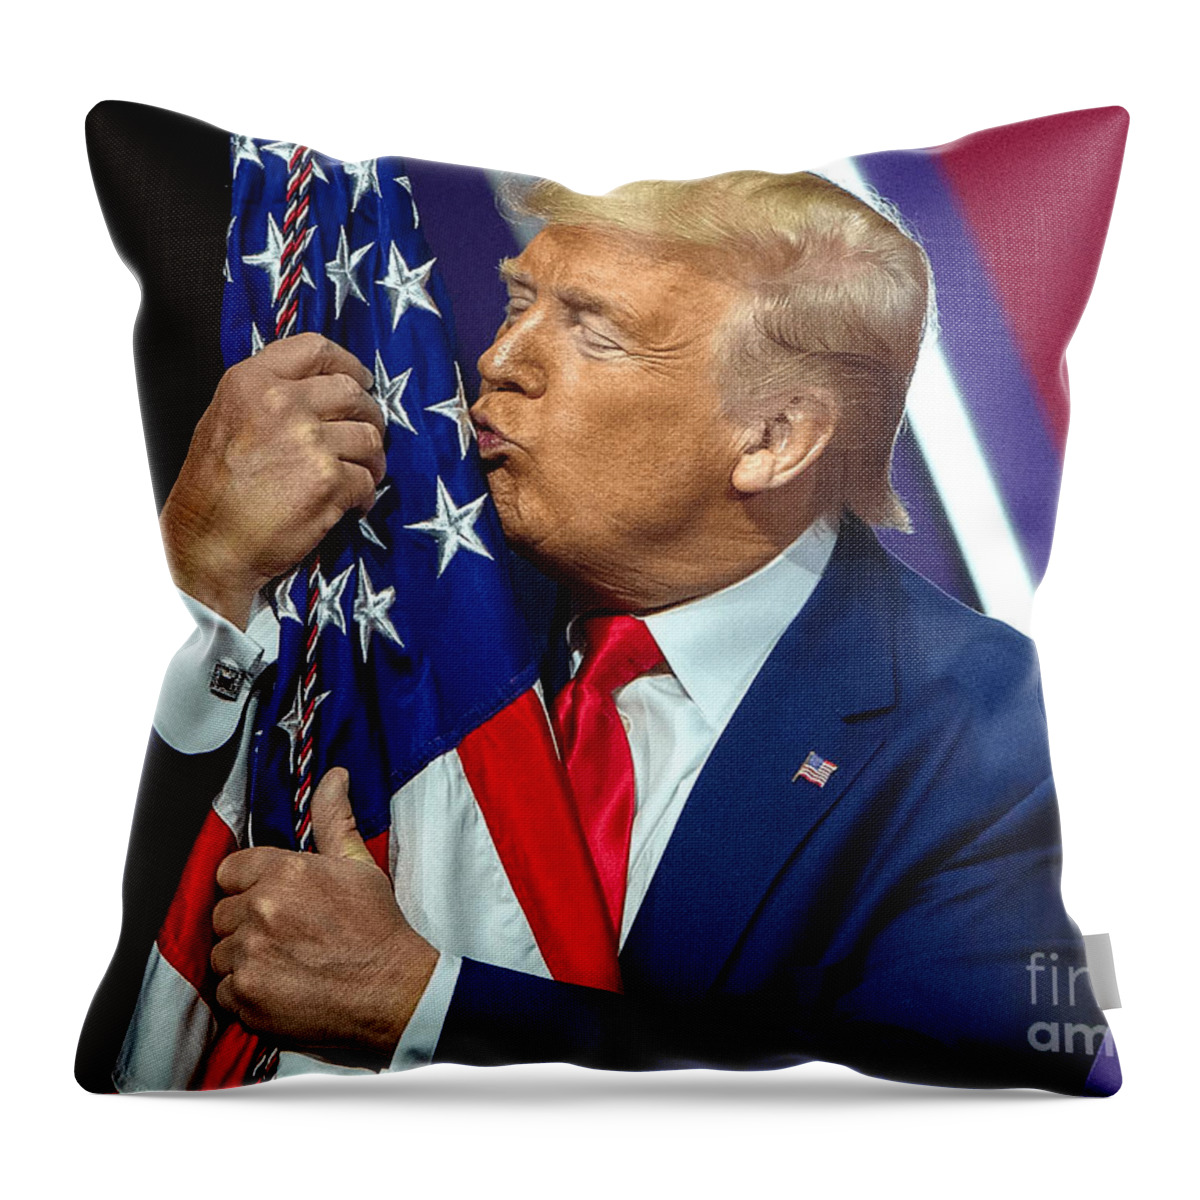 Donald Throw Pillow featuring the photograph Donald Trump by Action